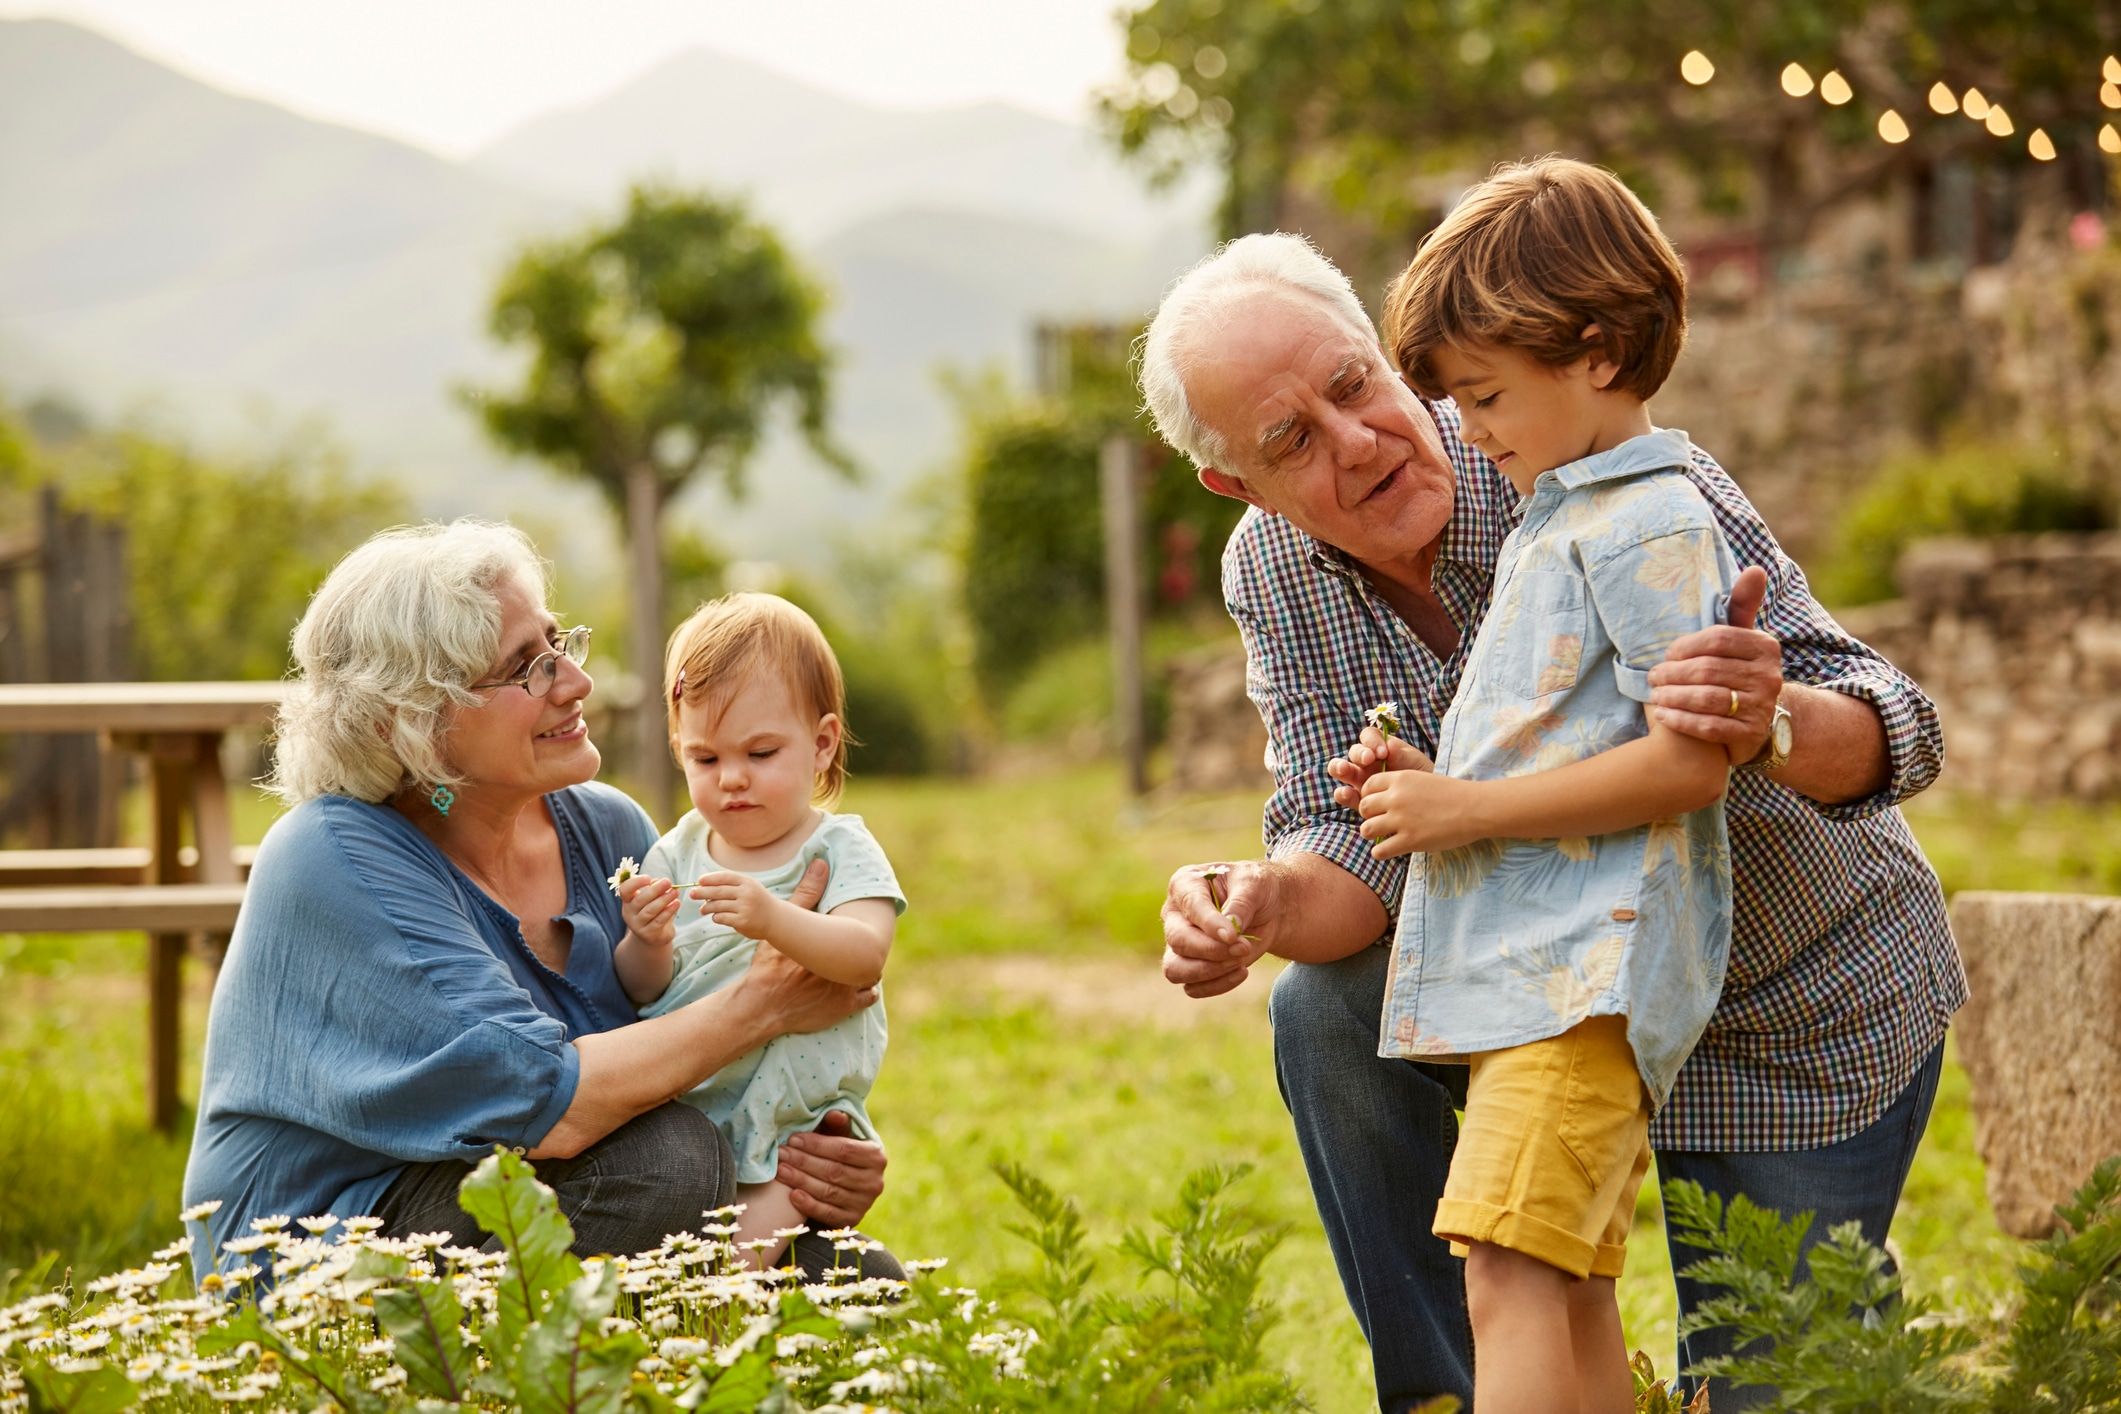 5 activities to do with seniors that will lift their spirits—and yours